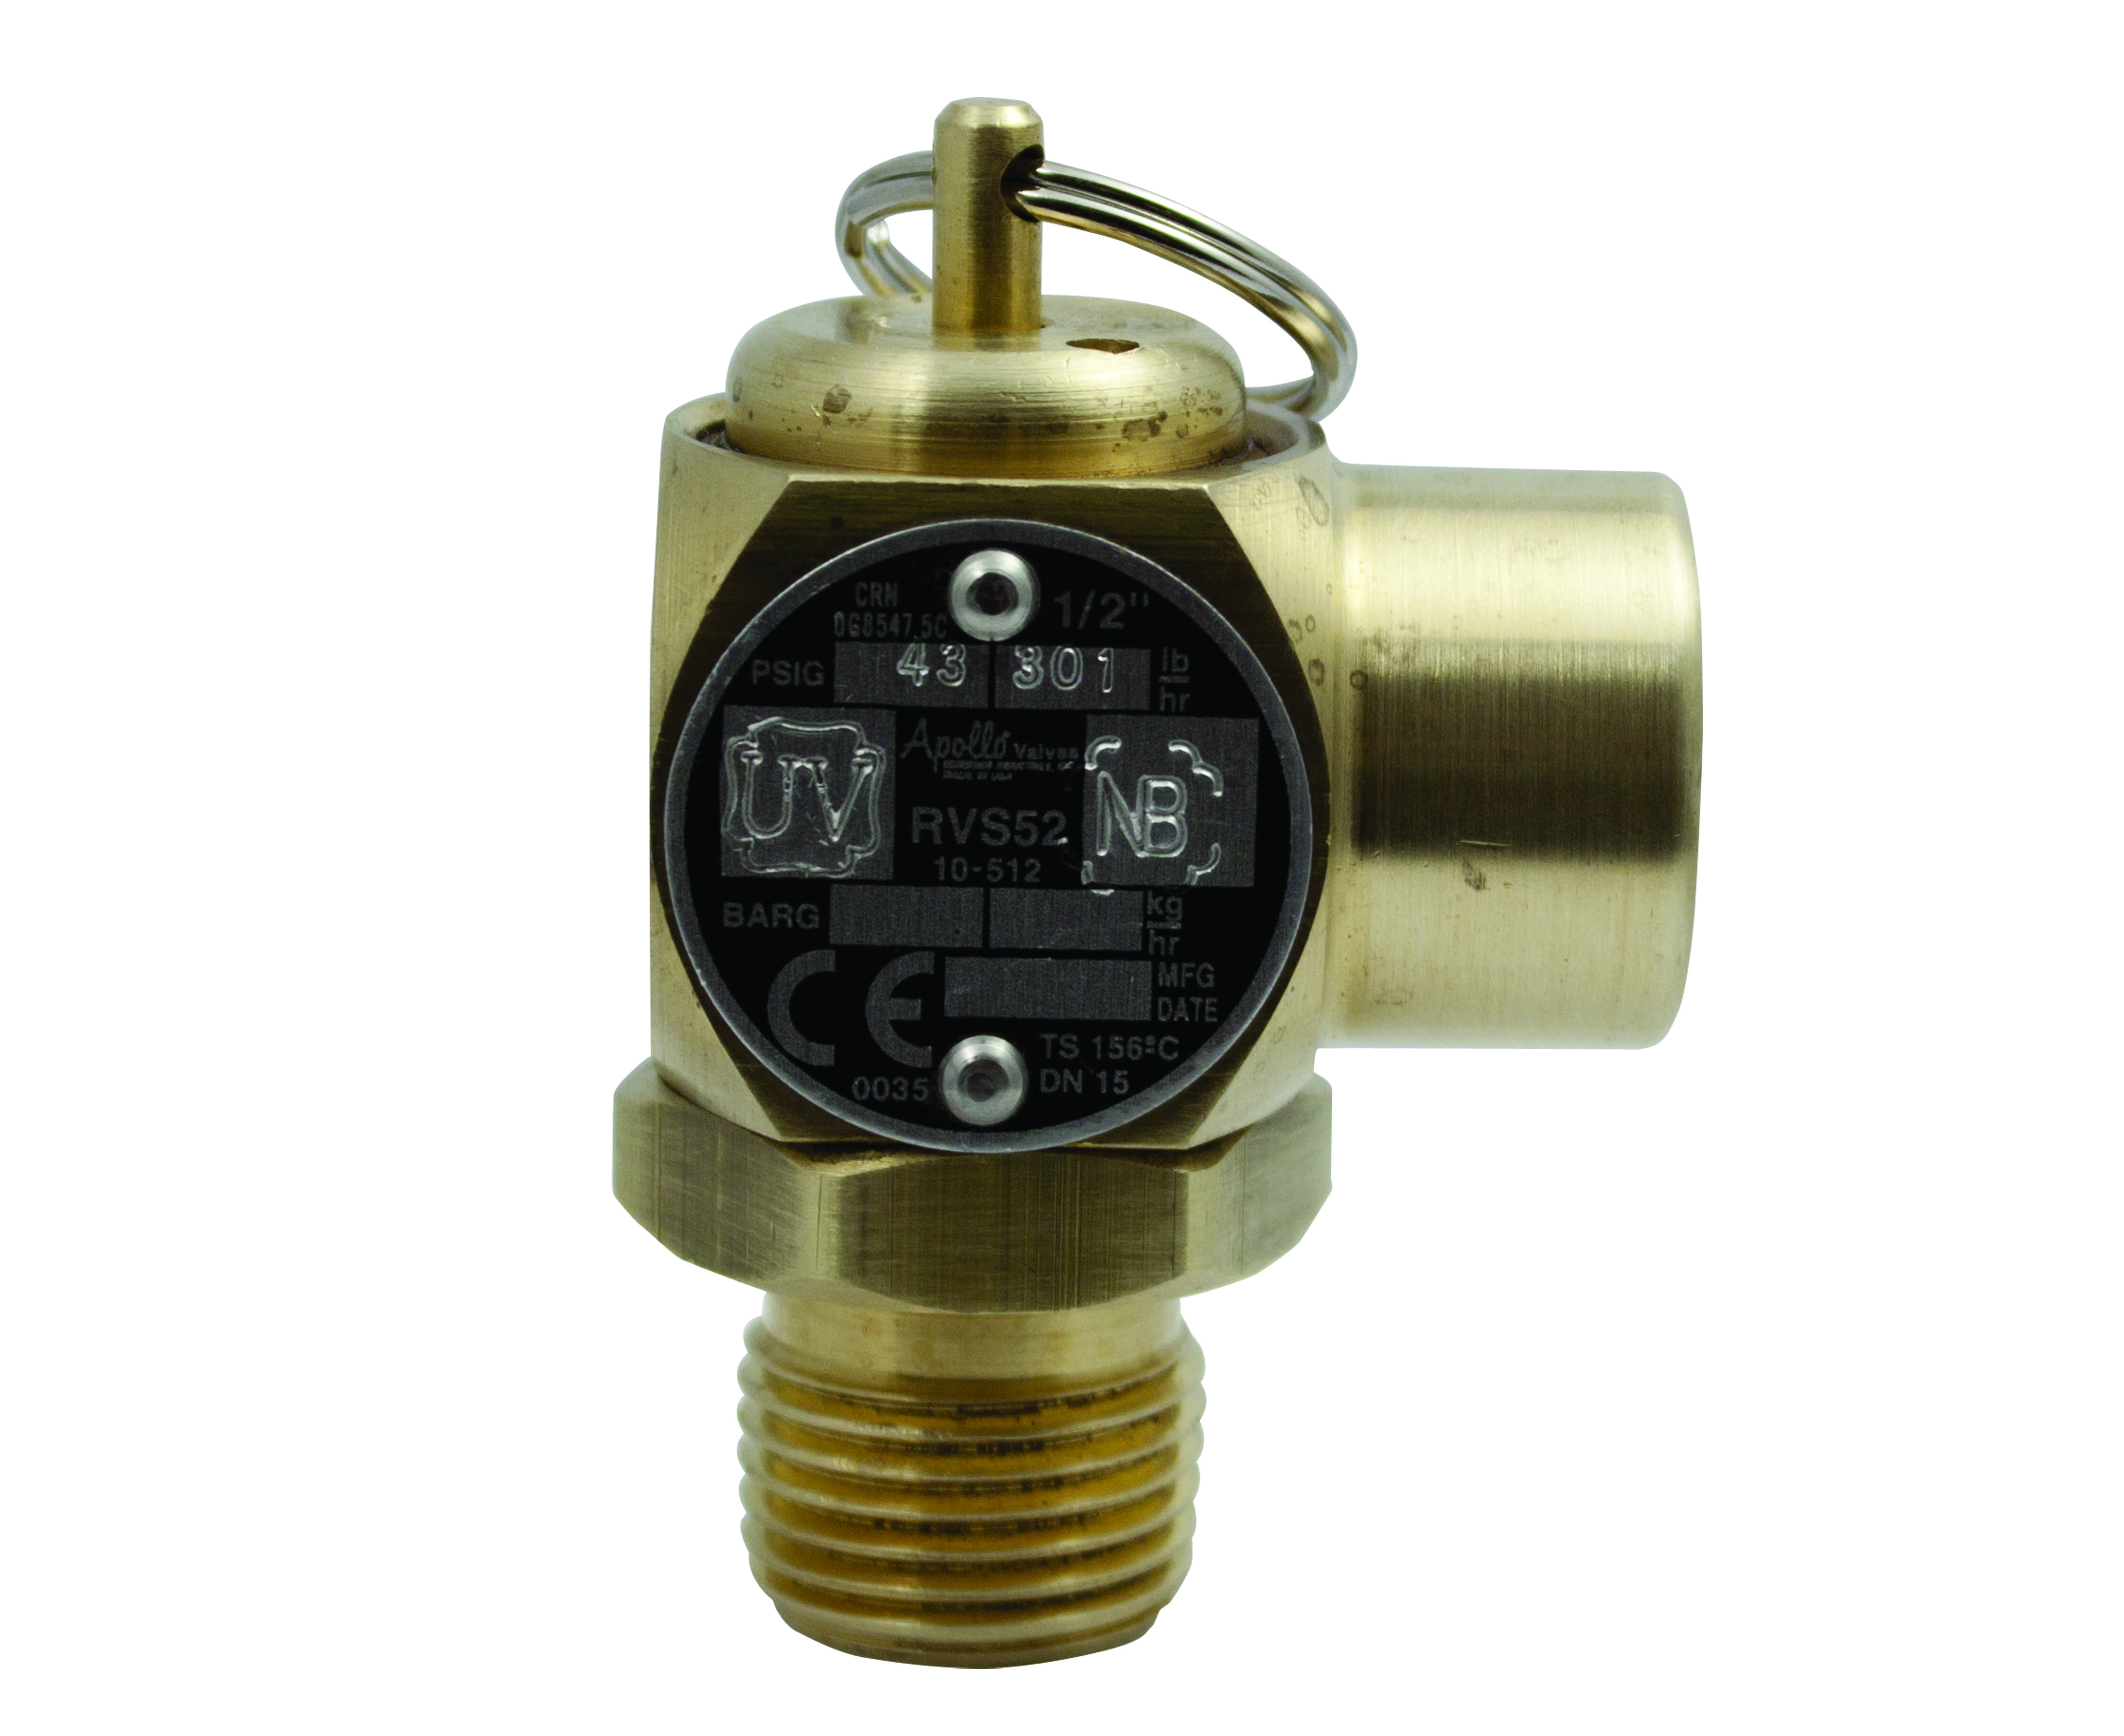 Preview image for Apollo ASME Sec VIII Steam Compact Brass Safety Relief Valves with Plain Brass Finish, Stainless Steel Trim, Test Report (2 x BSPP)